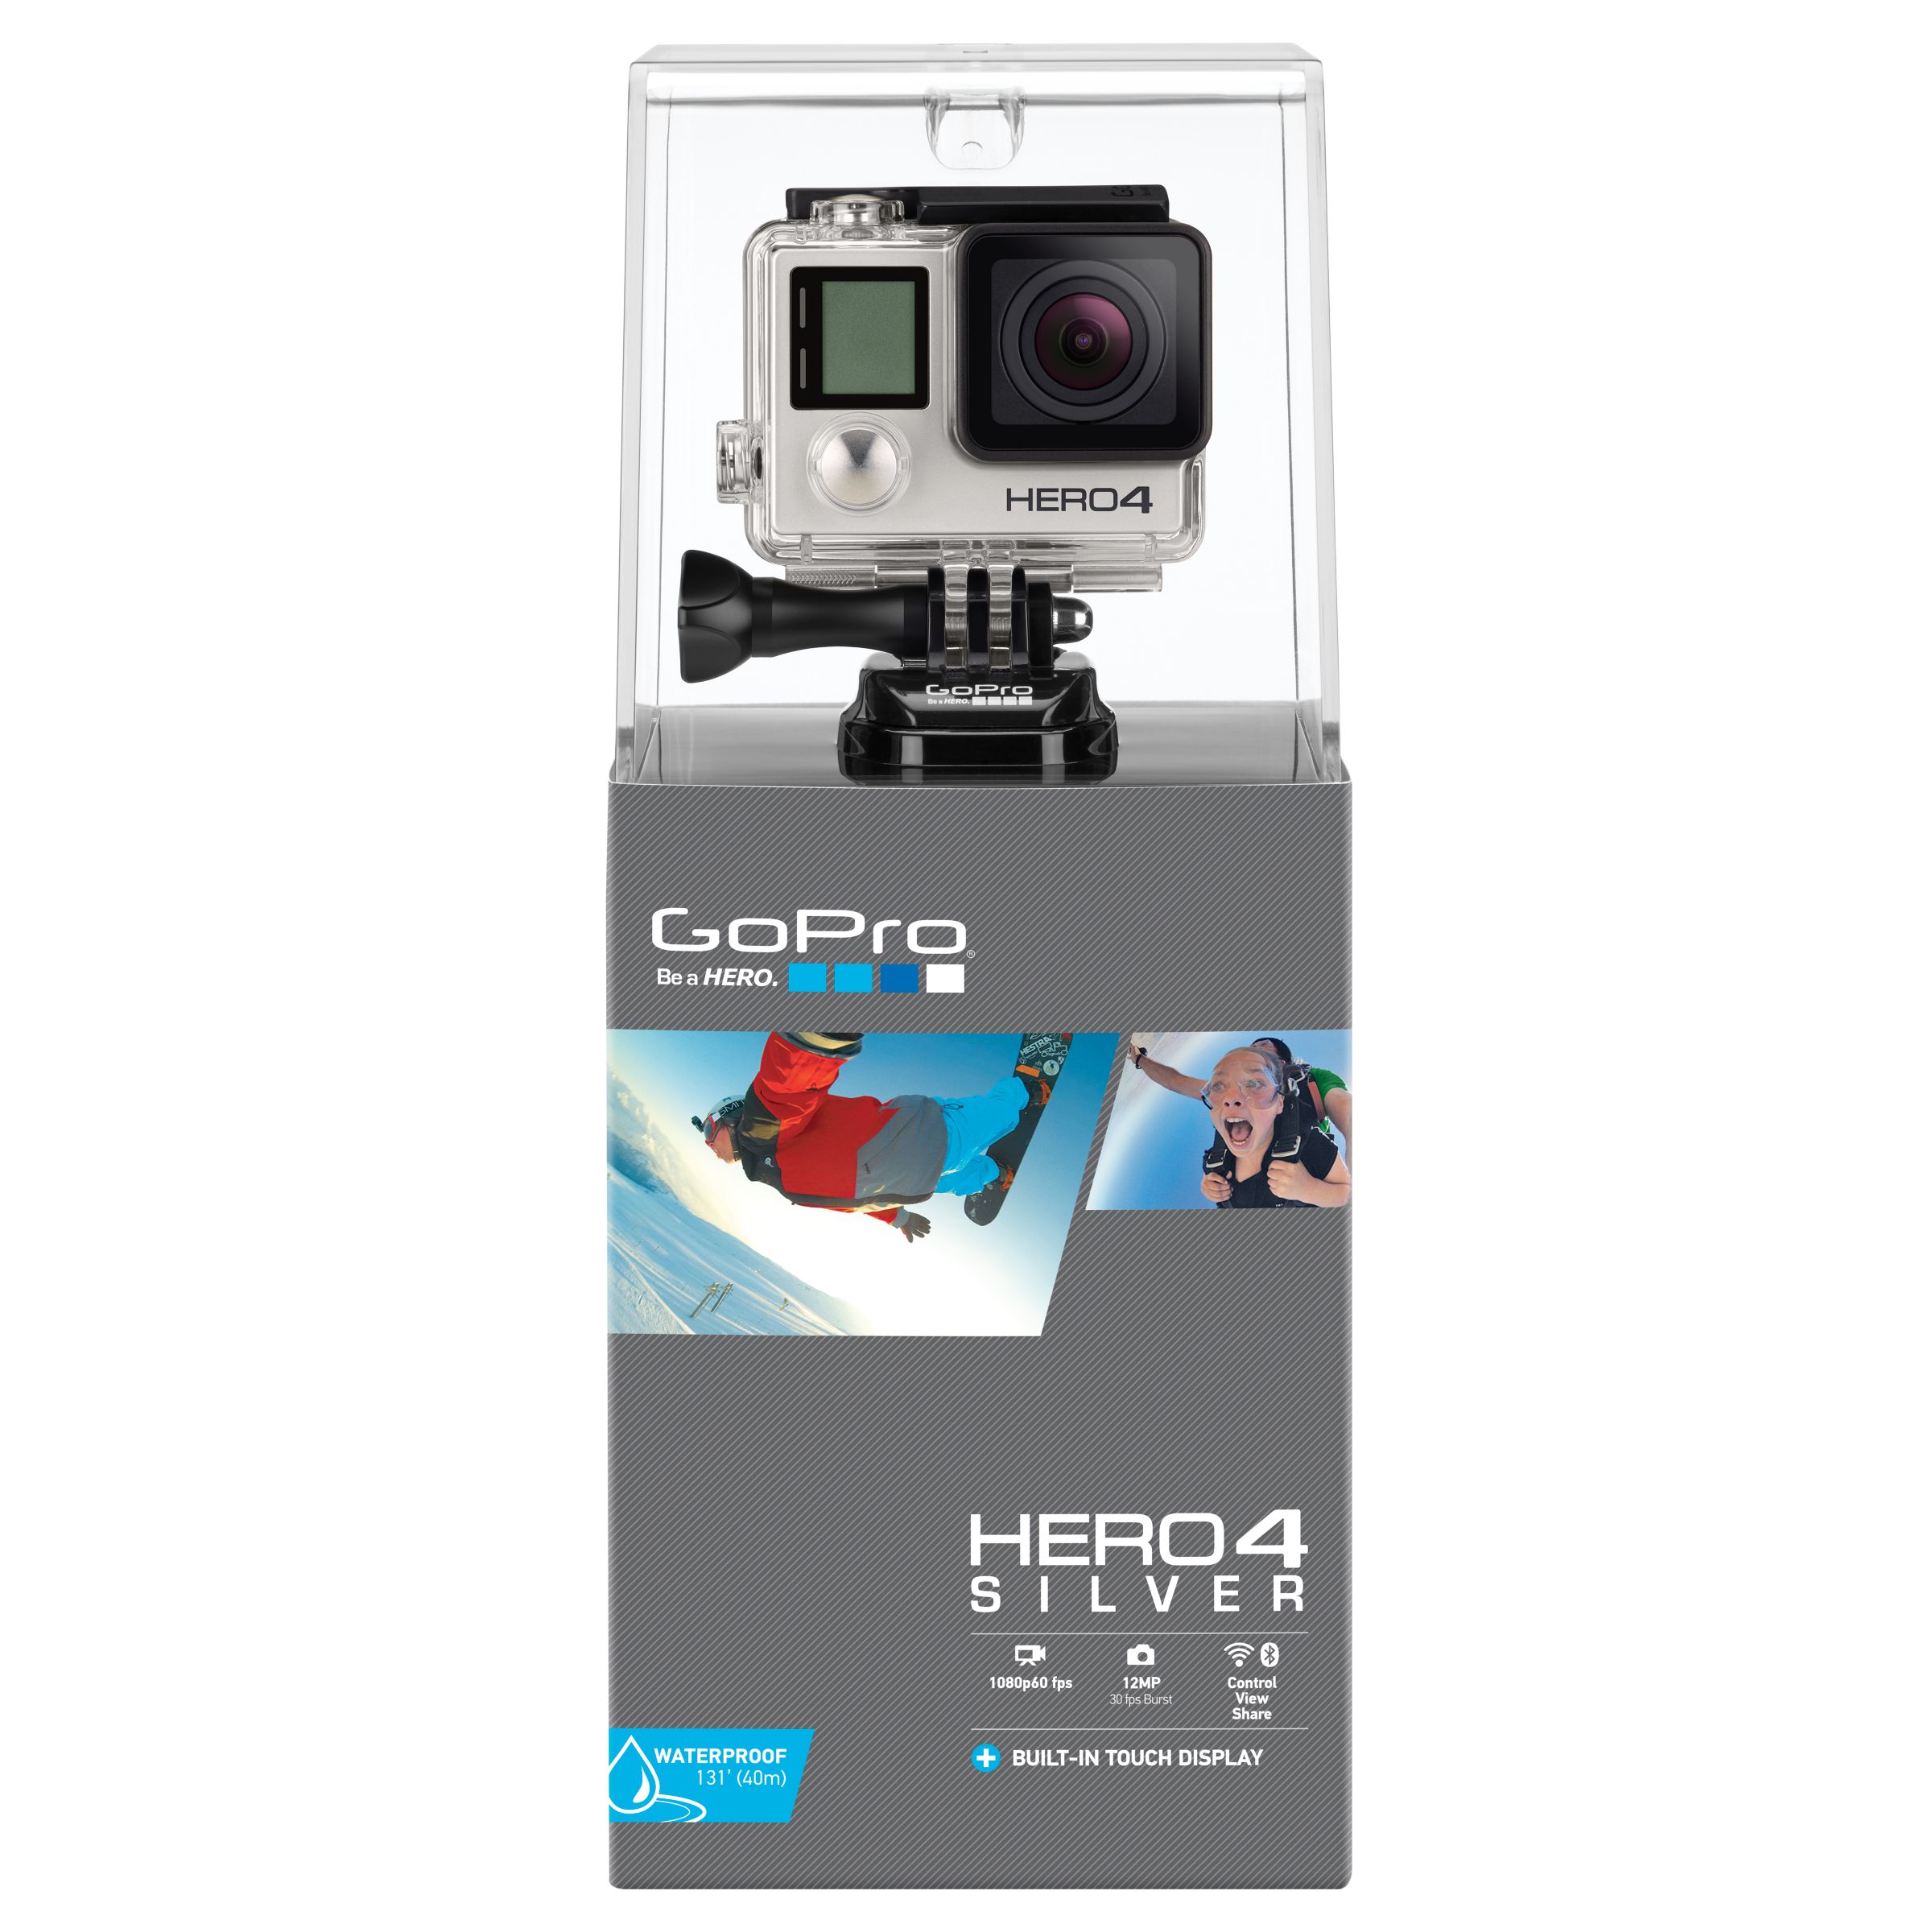 Gopro Hero4 Silver Edition Camcorder Hd 1080p 12mp Bluetooth Wi Fi Waterproof Touch Screen At John Lewis Partners